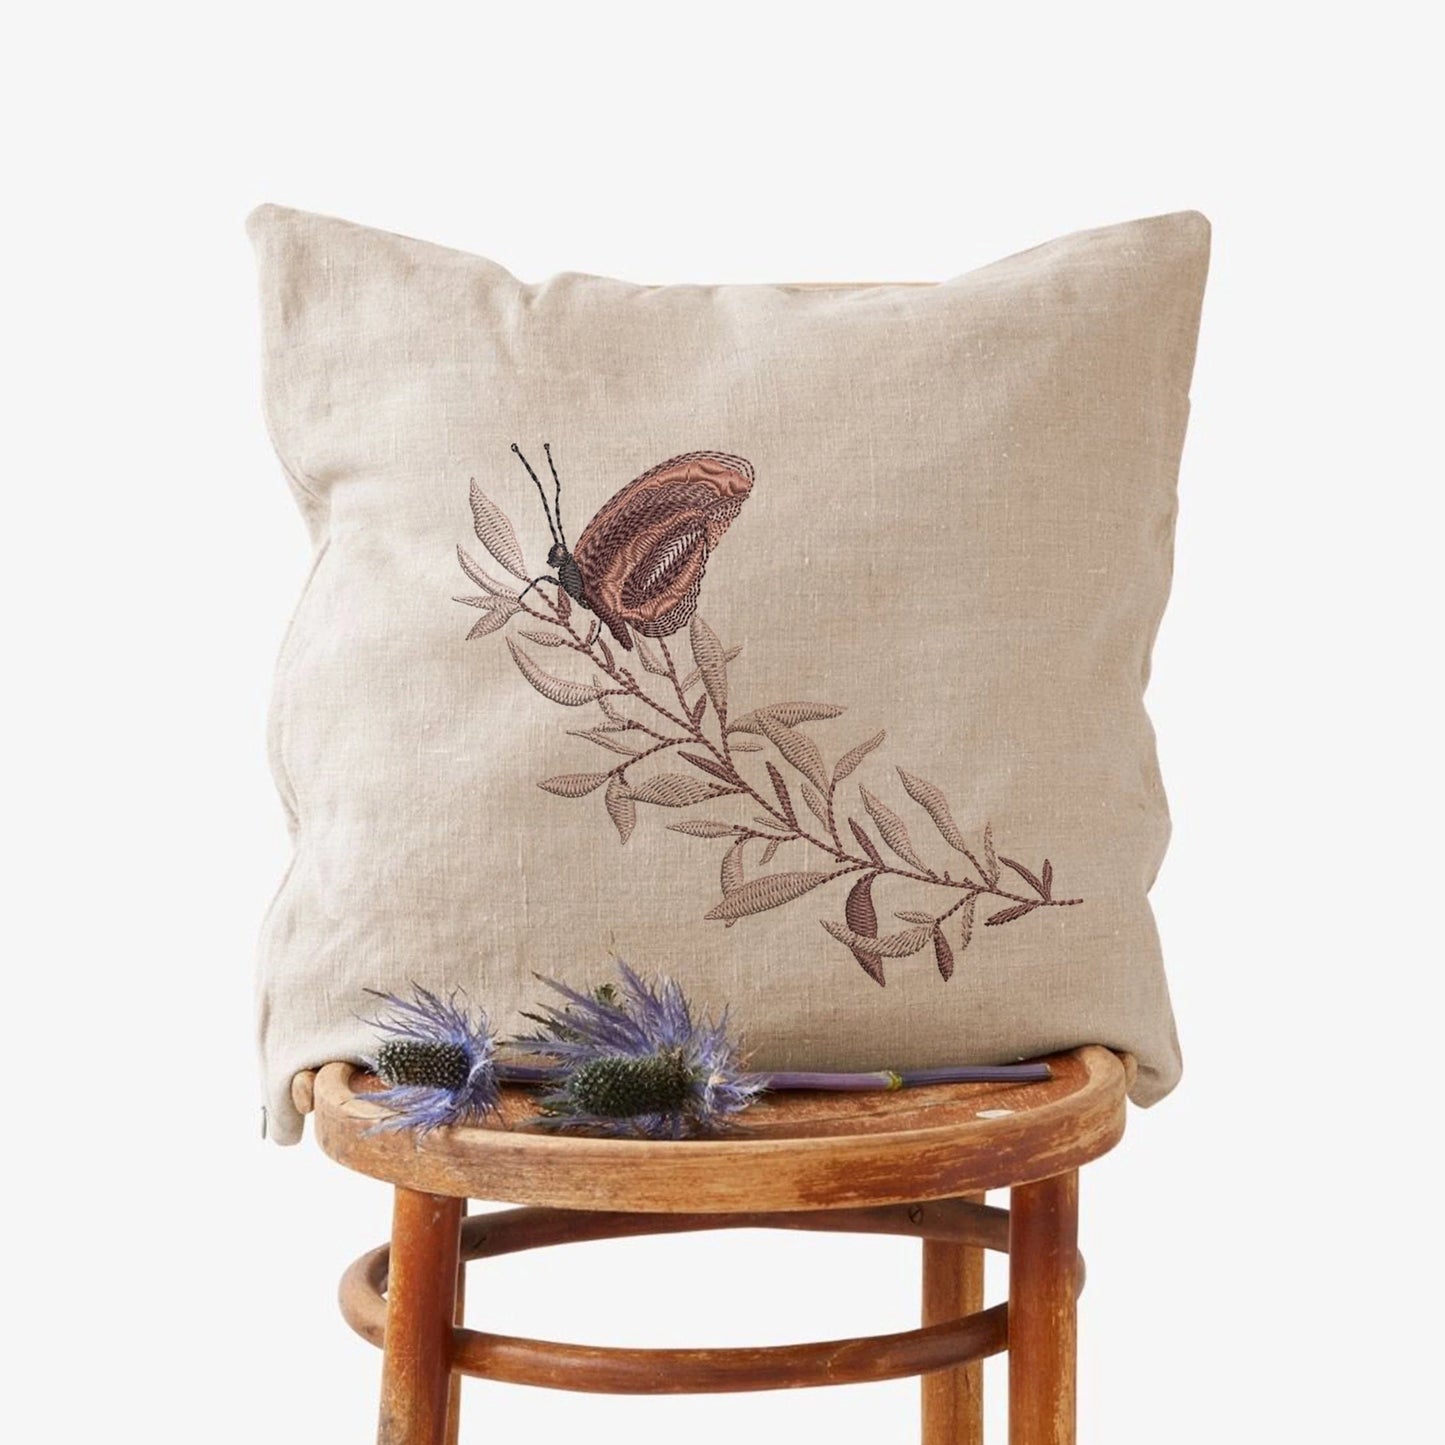 Romantic Flower Butterfly Machine Embroidery Design on pillow